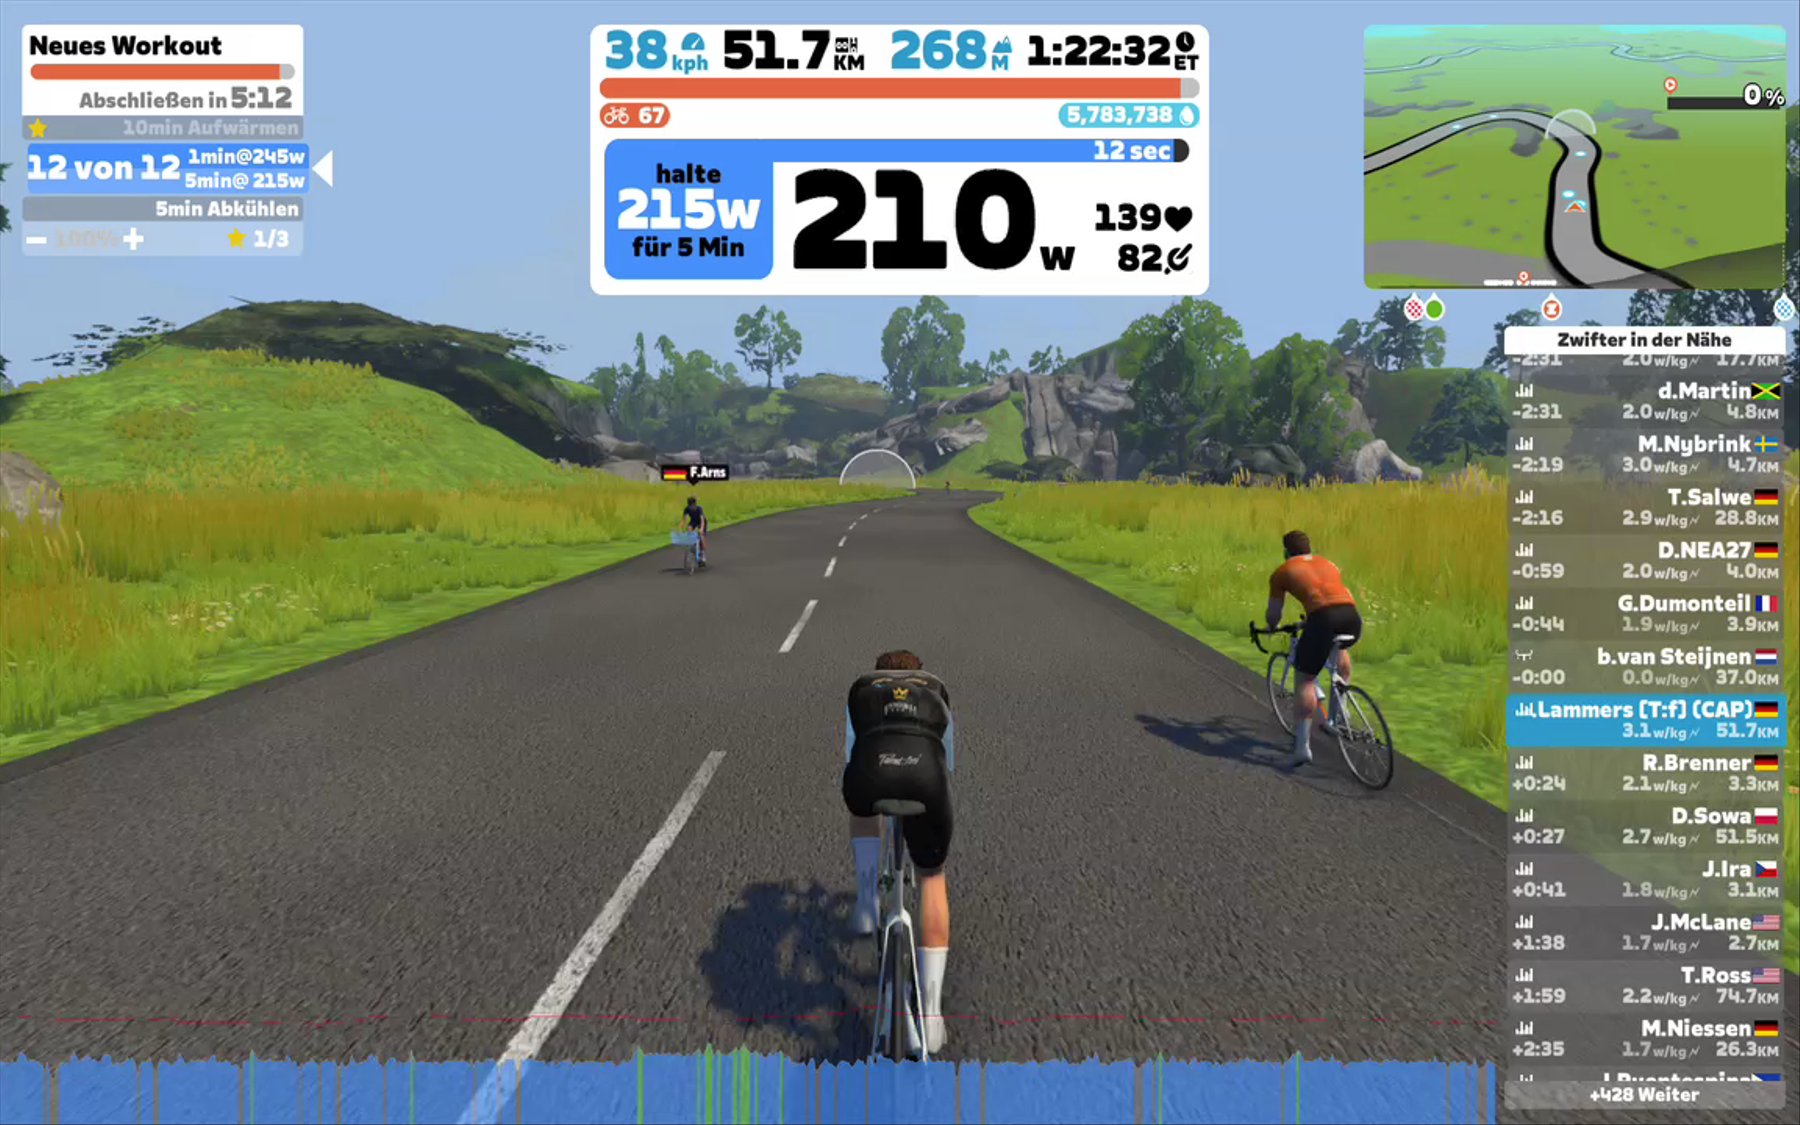 Zwift - Neues Workout in France